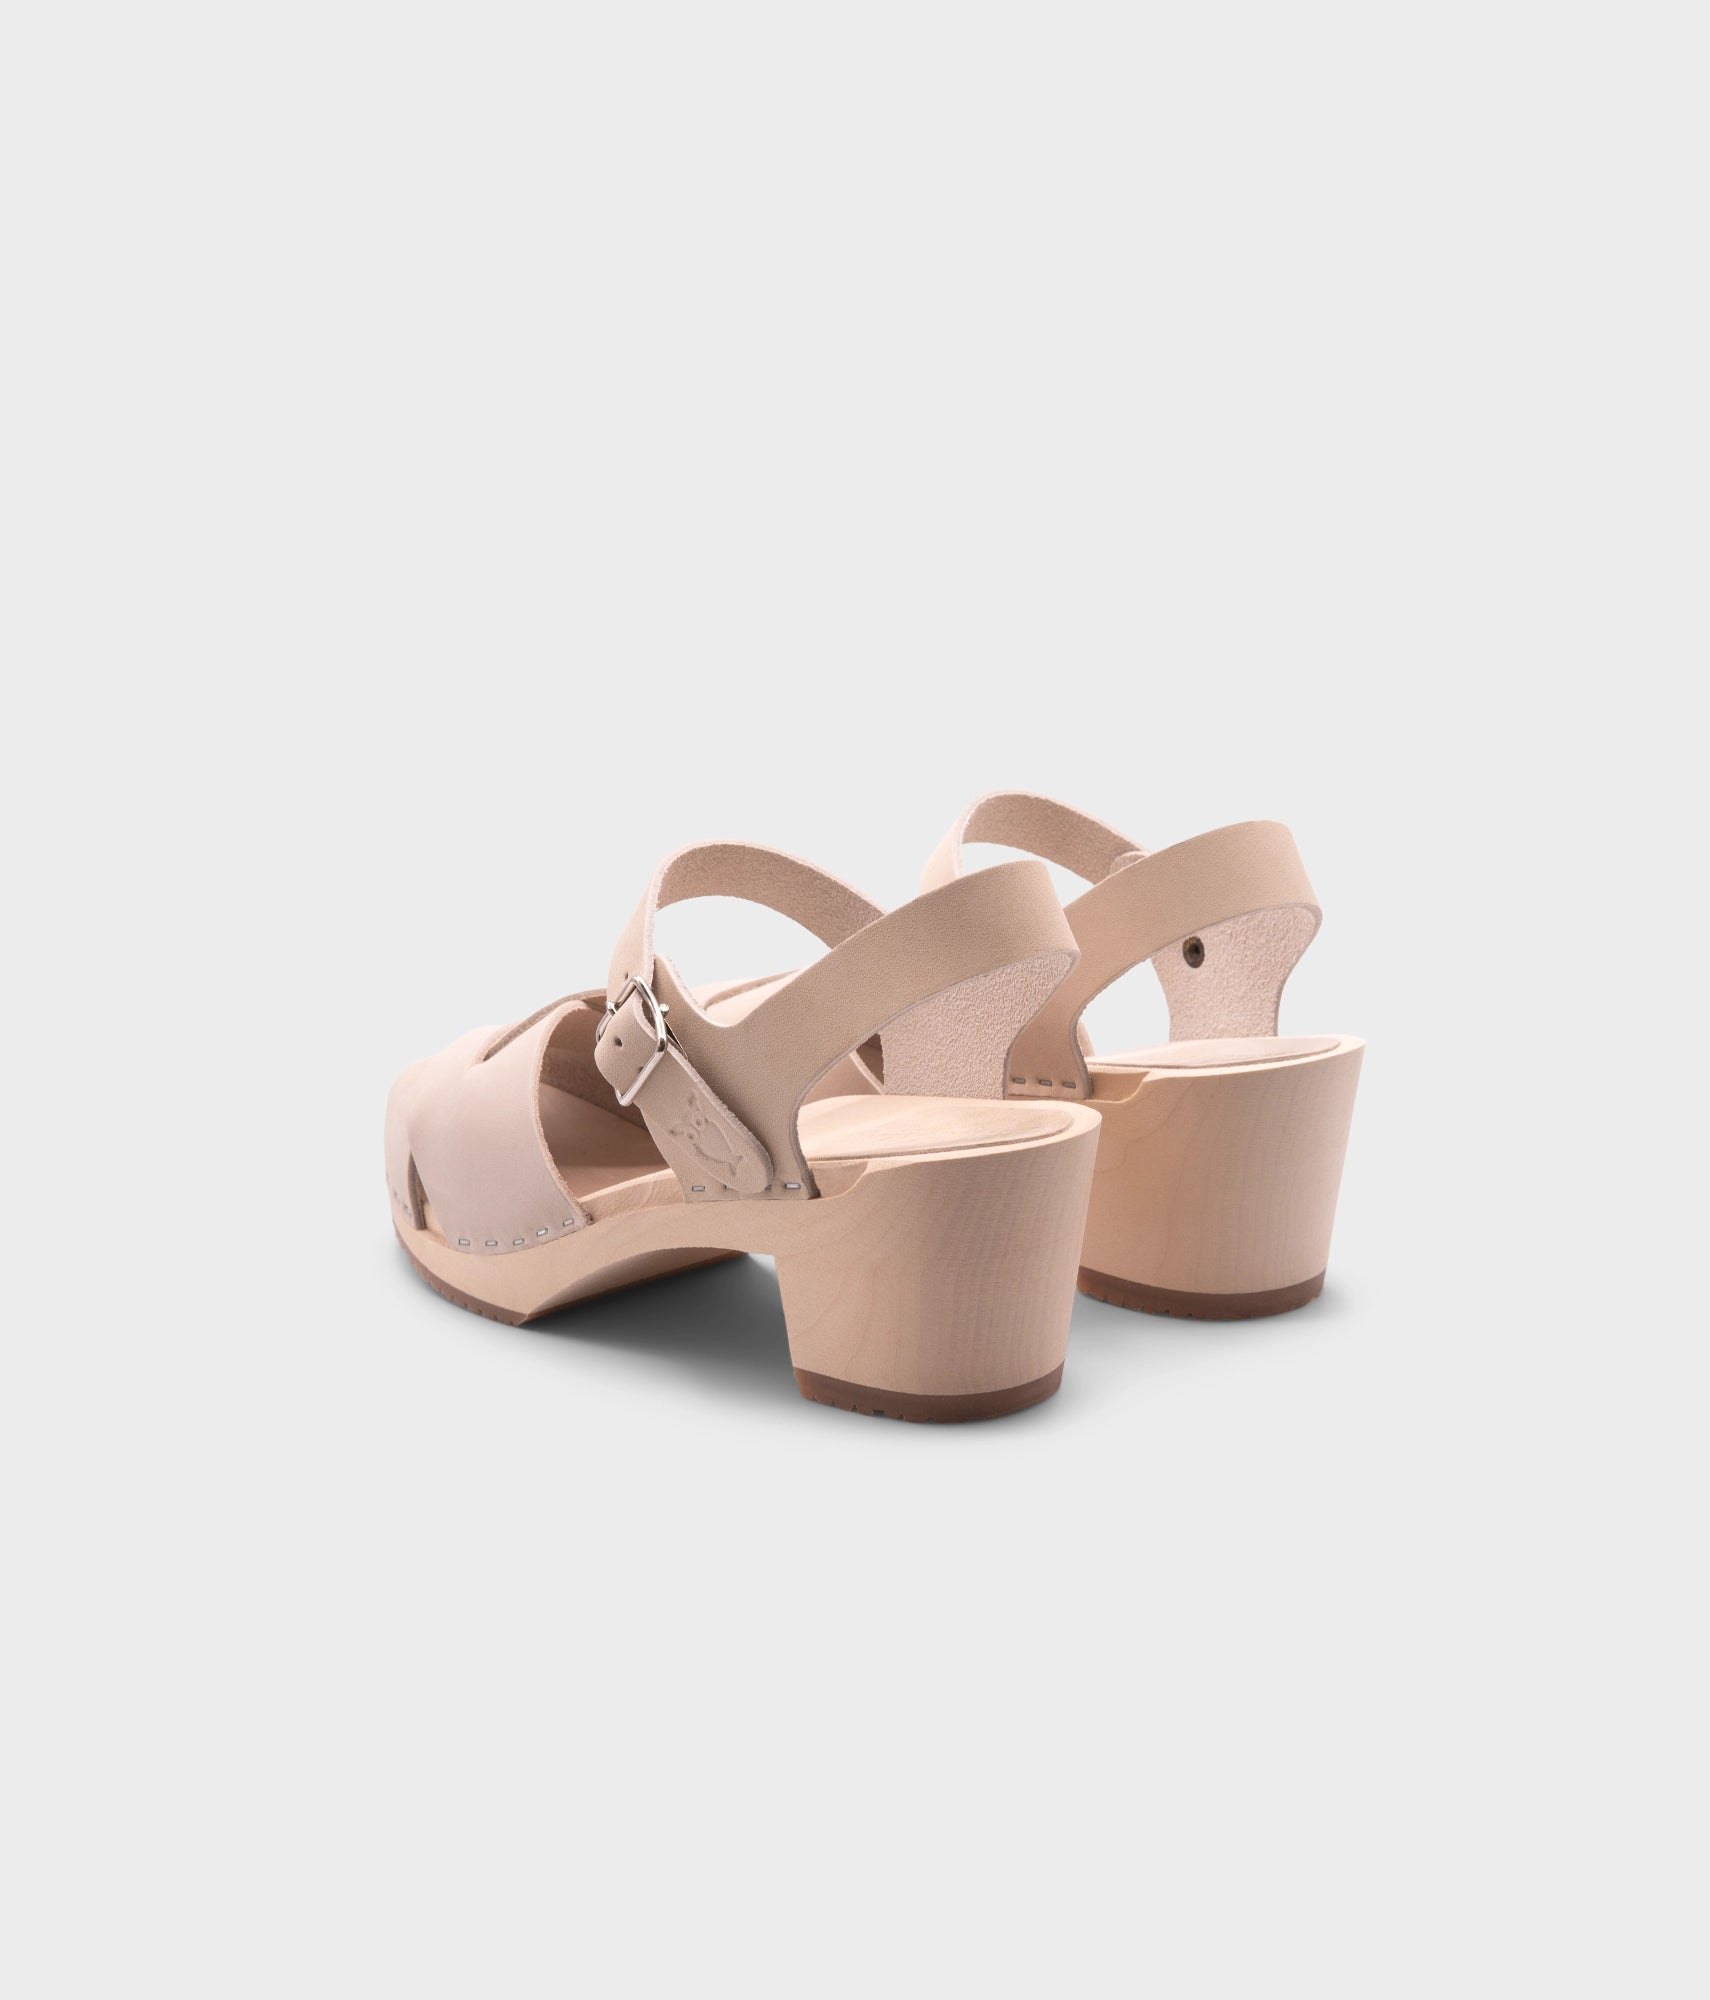 high heeled clog sandals in sand white nubuck leather with an open-toe stapled on a light wooden base